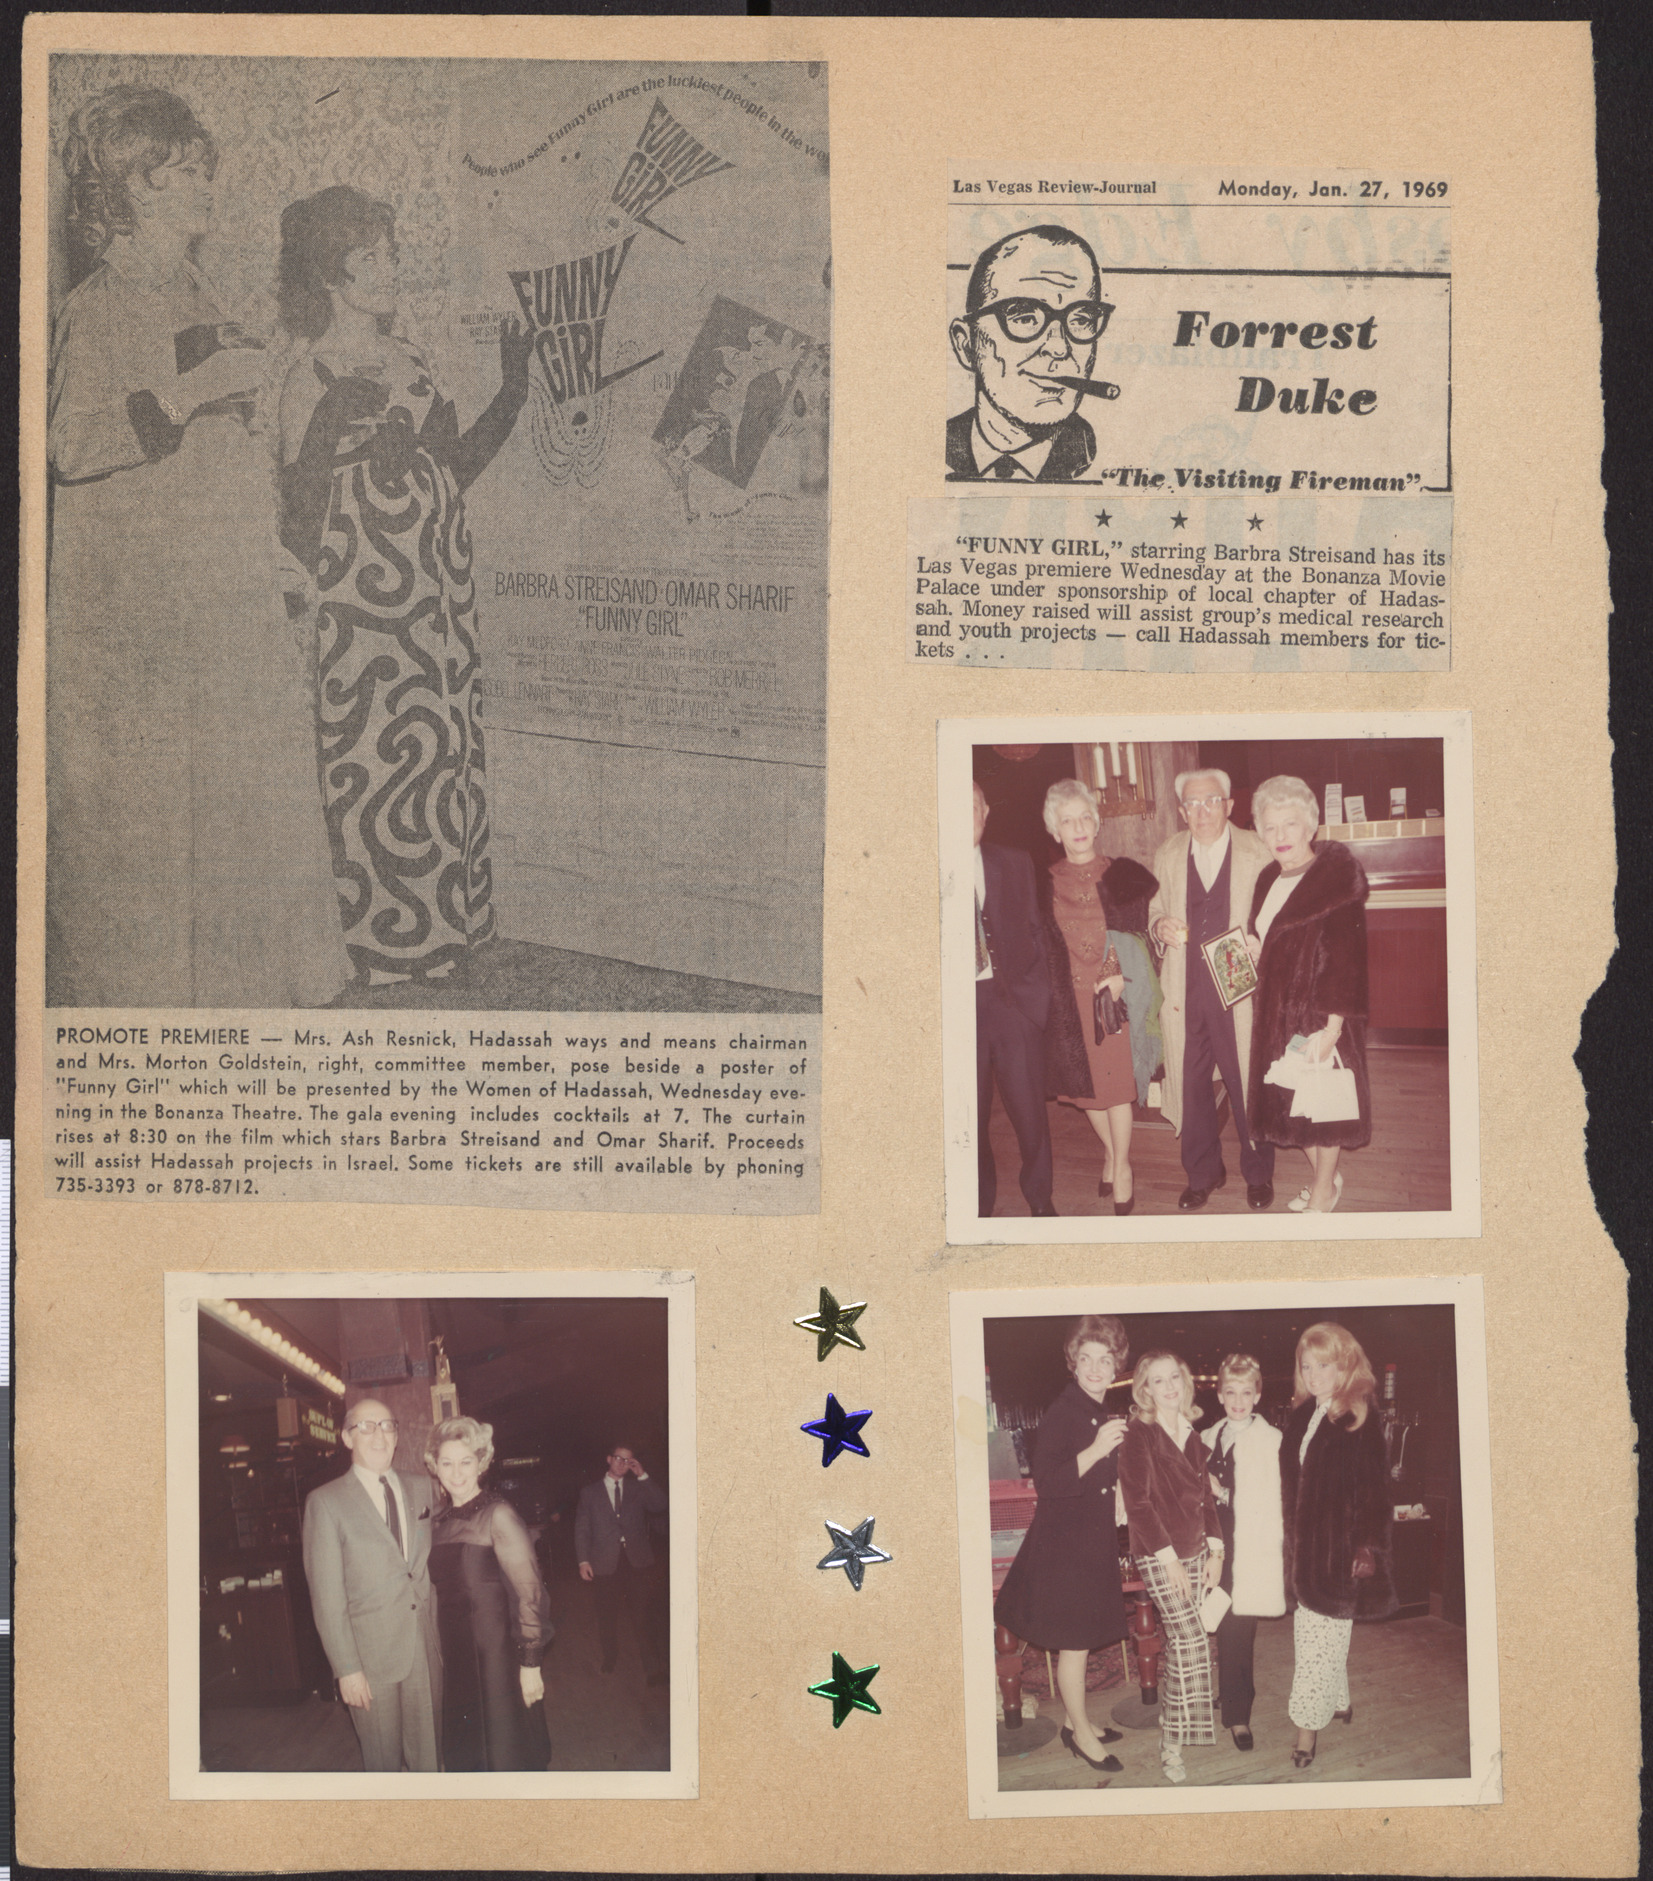 Newspaper clippings about the premier of Funny Girl film and photographs of event, January 1969